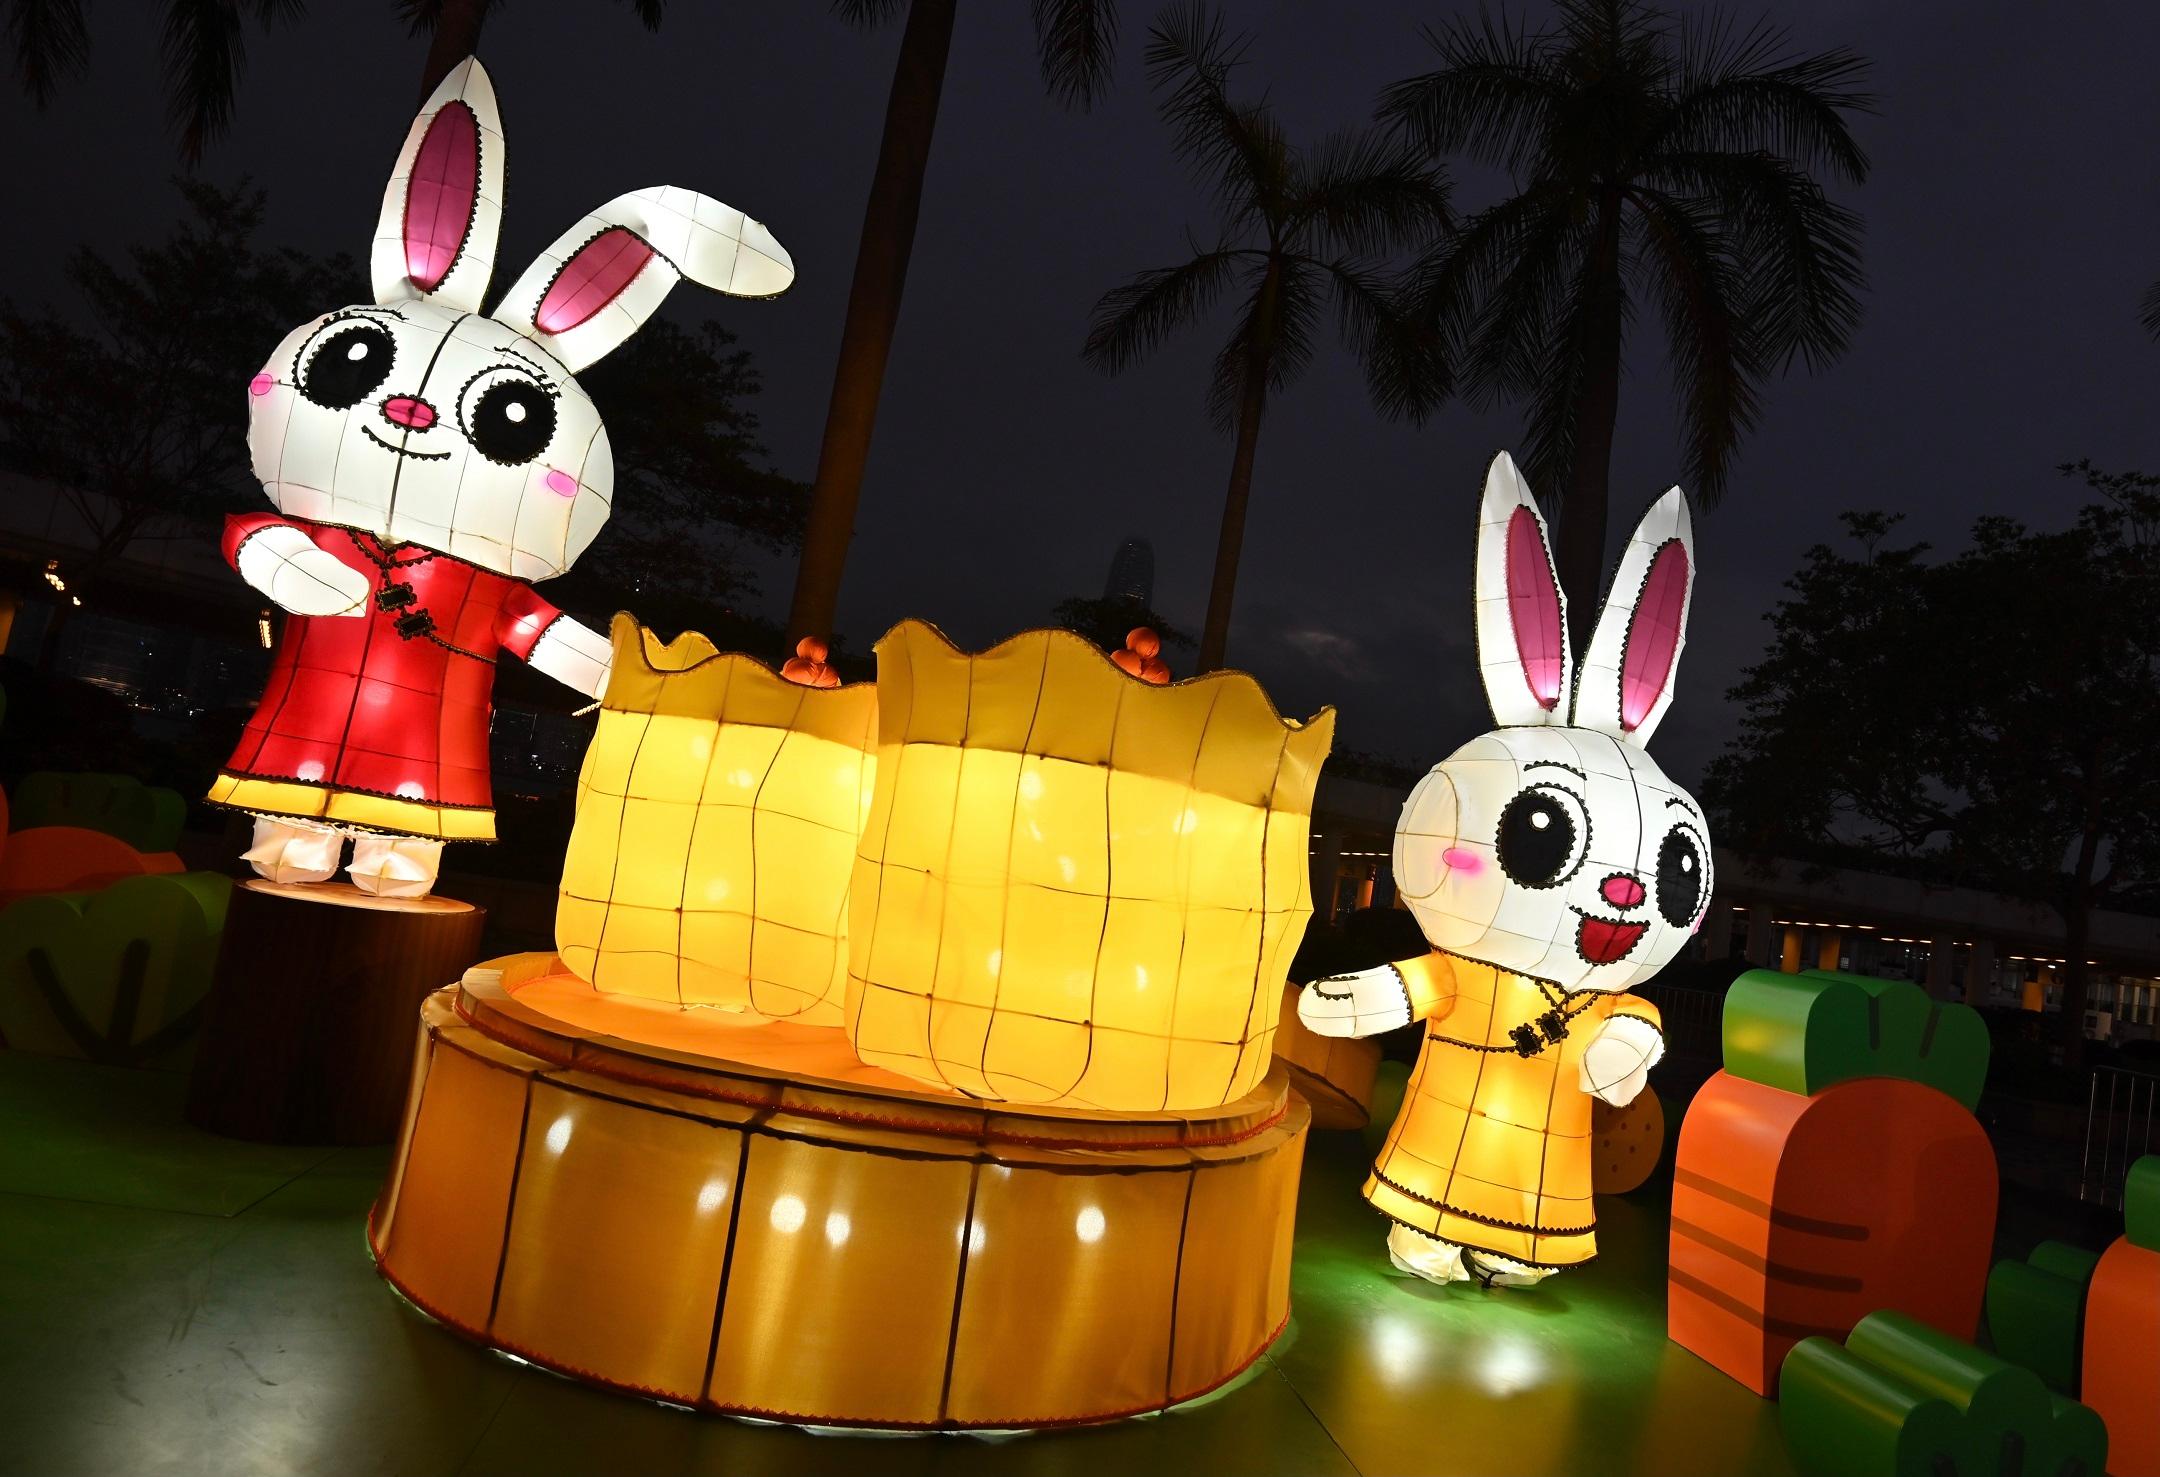 The Leisure and Cultural Services Department (LCSD) will present the Urban Lunar New Year Lantern Displays "The Luck-Bringing Rabbit - Lanterns to Celebrate the New Year" at the Hong Kong Cultural Centre (HKCC) Piazza from today (January 12) until February 7. Admission is free. The Intangible Cultural Heritage Office under the LCSD is collaborating with local master Hui Ka-hung to present lantern displays showcasing several sprightly rabbits, energetic lions, festive food and dim sum to add festive colour and a joyful atmosphere to the HKCC Piazza and to promote the art of traditional paper crafting.